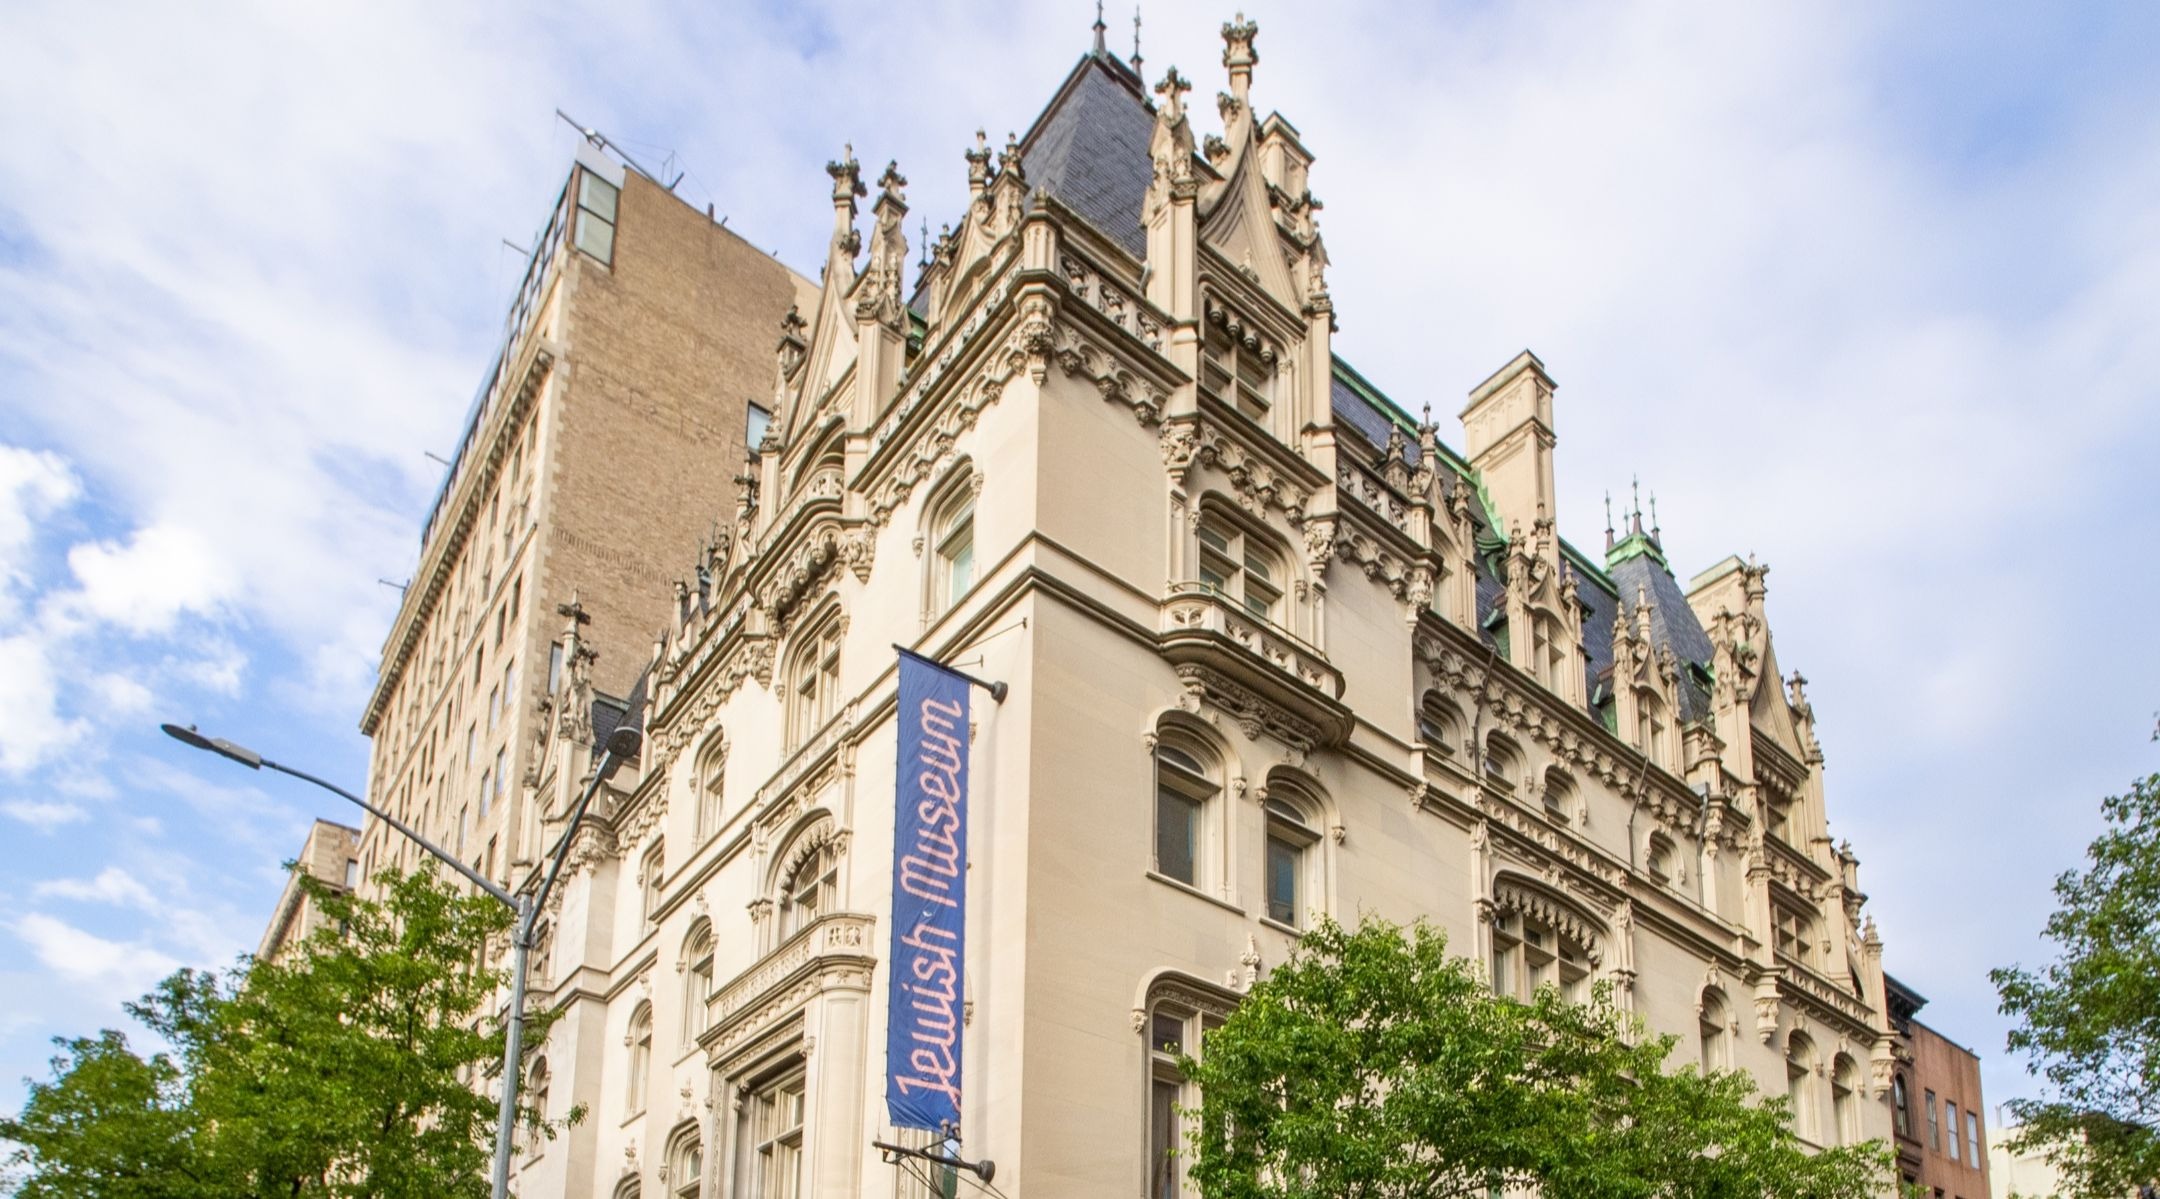 NYC's Jewish Museum to reopen Oct. 1 following 6month closure due to